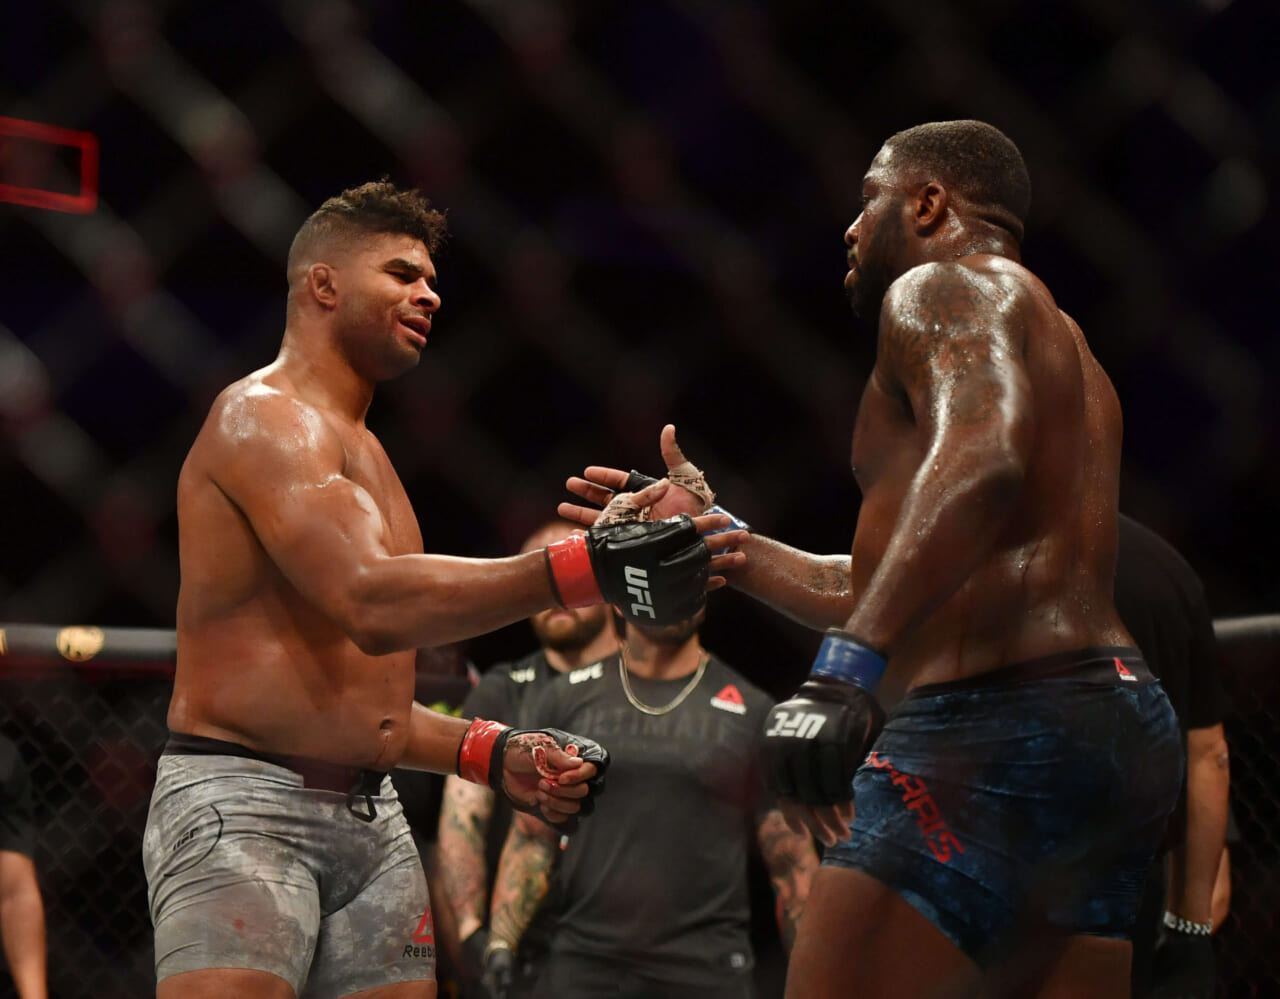 Alistair Overeem signs with Glory Kickboxing